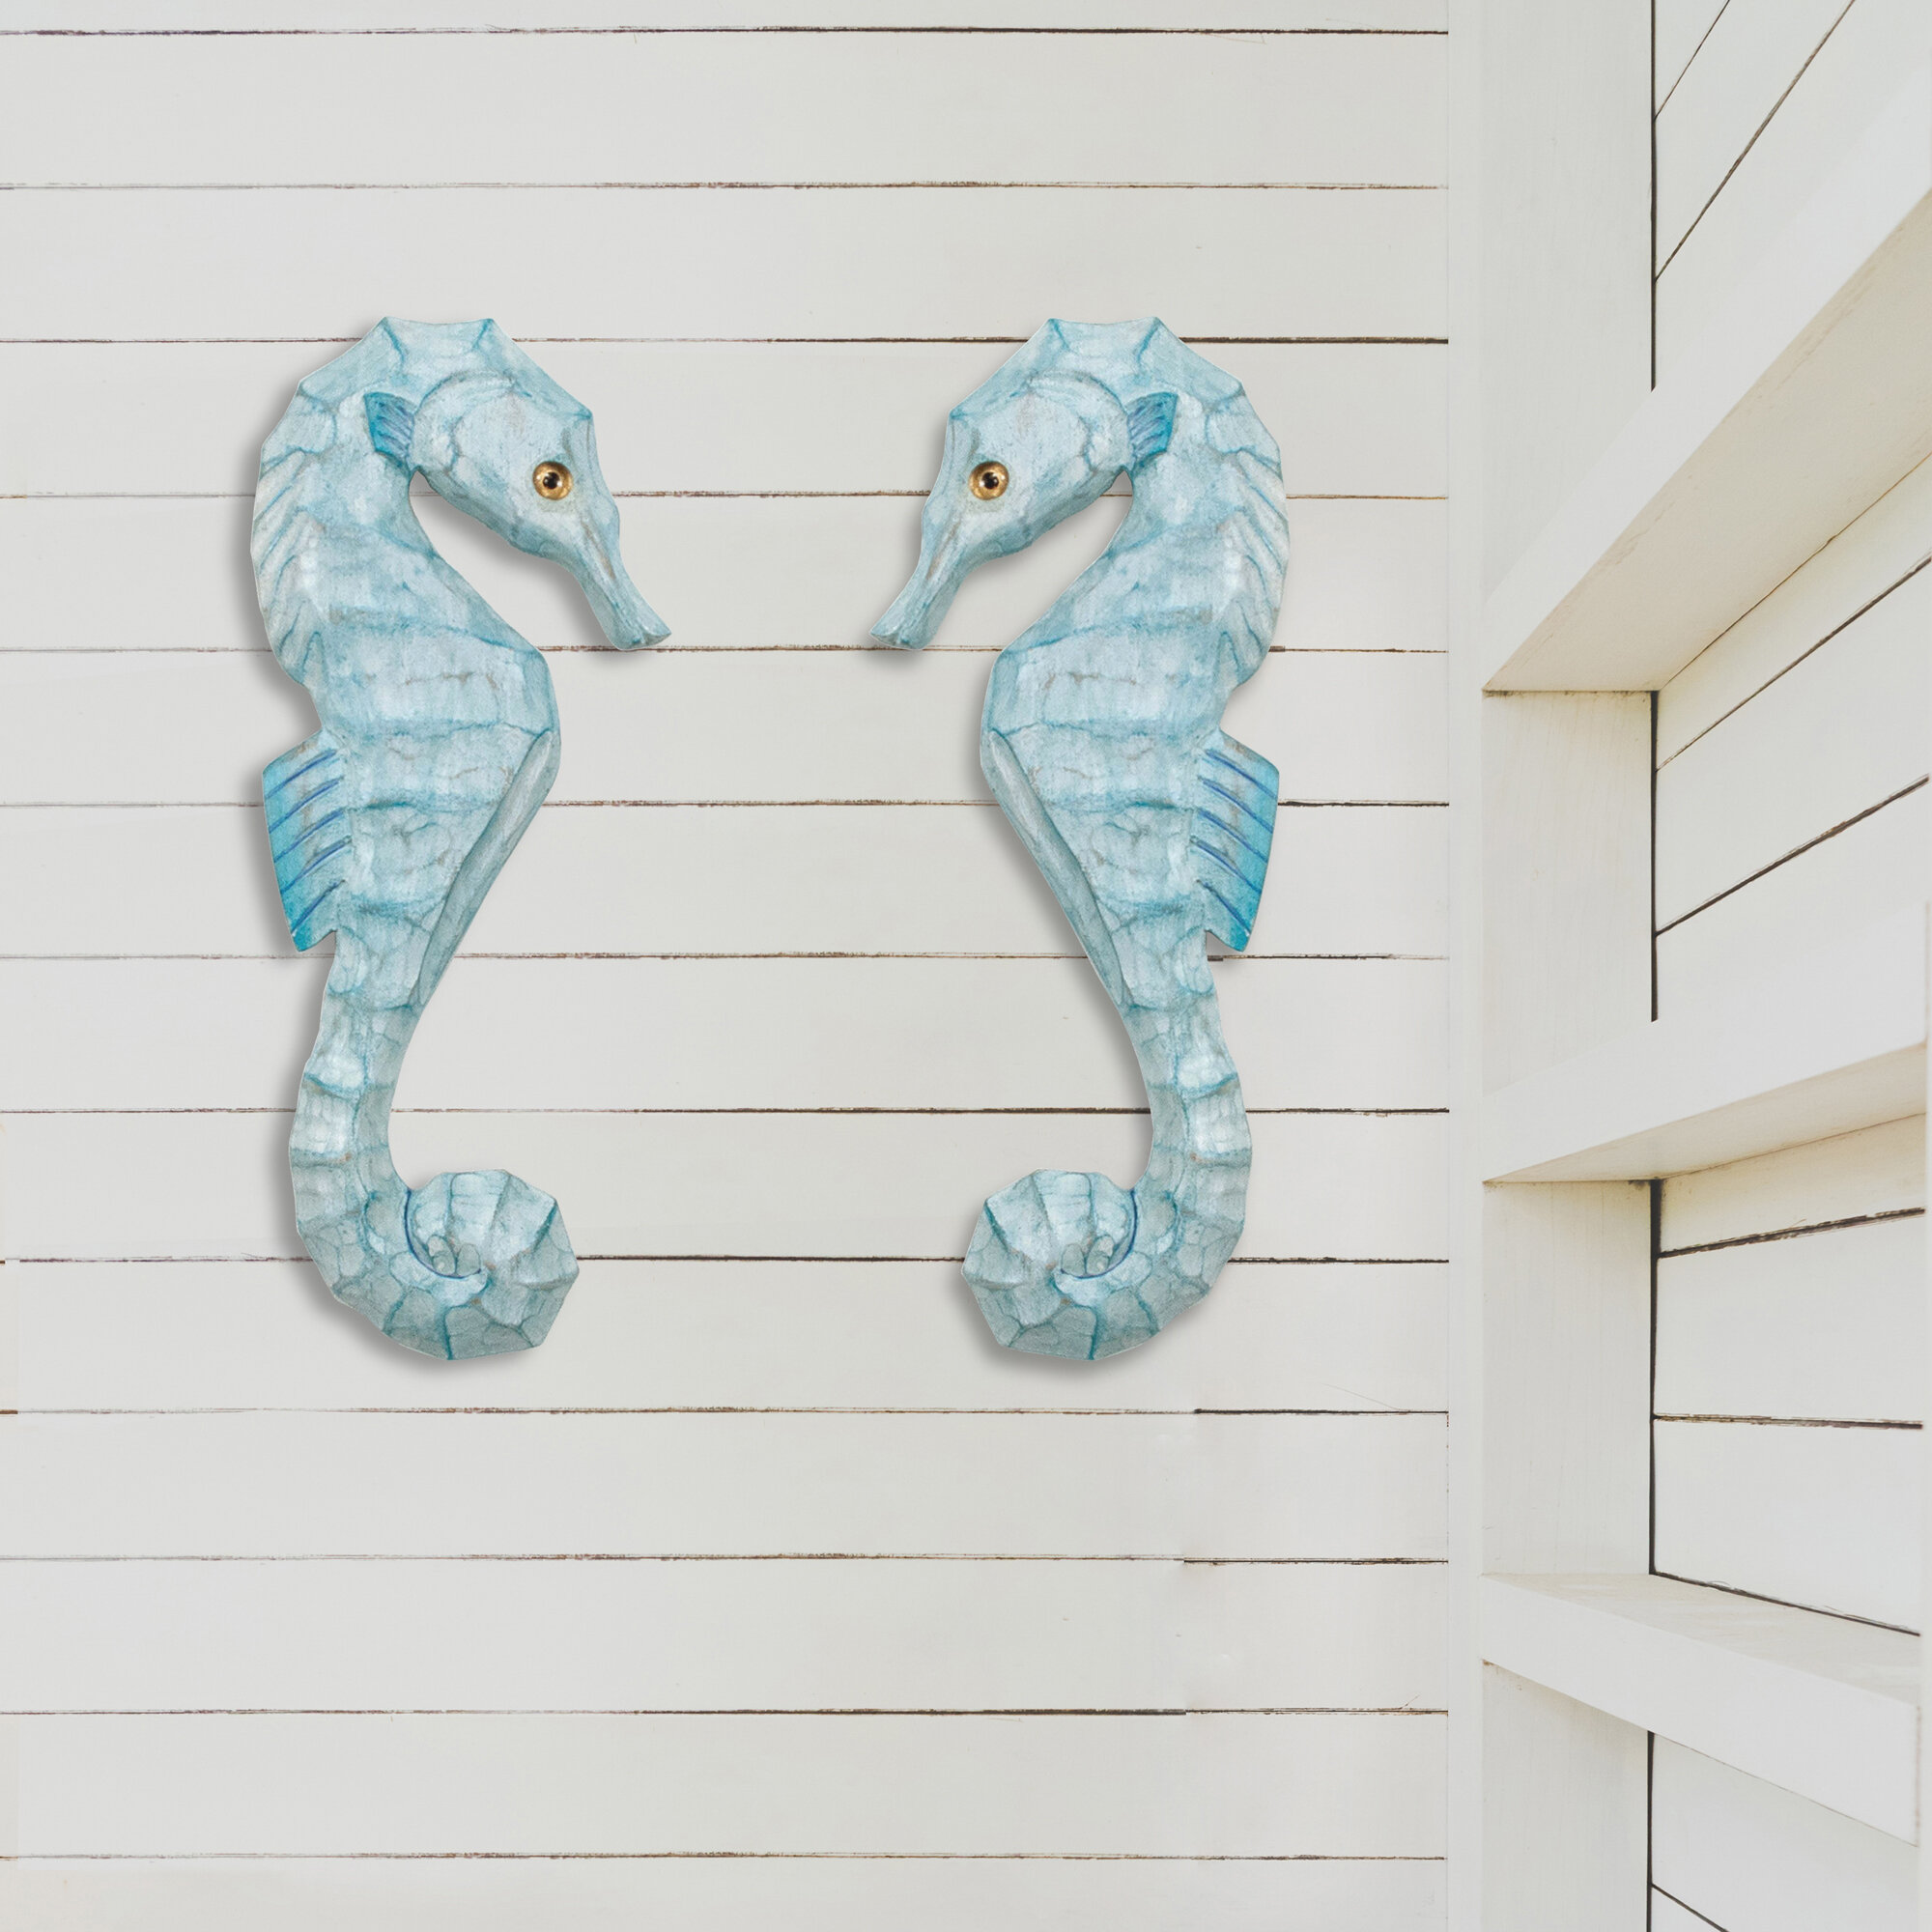 Turquoise SEAHORSES  Cast Iron Wall Shelf Brackets Nautical Home Accent